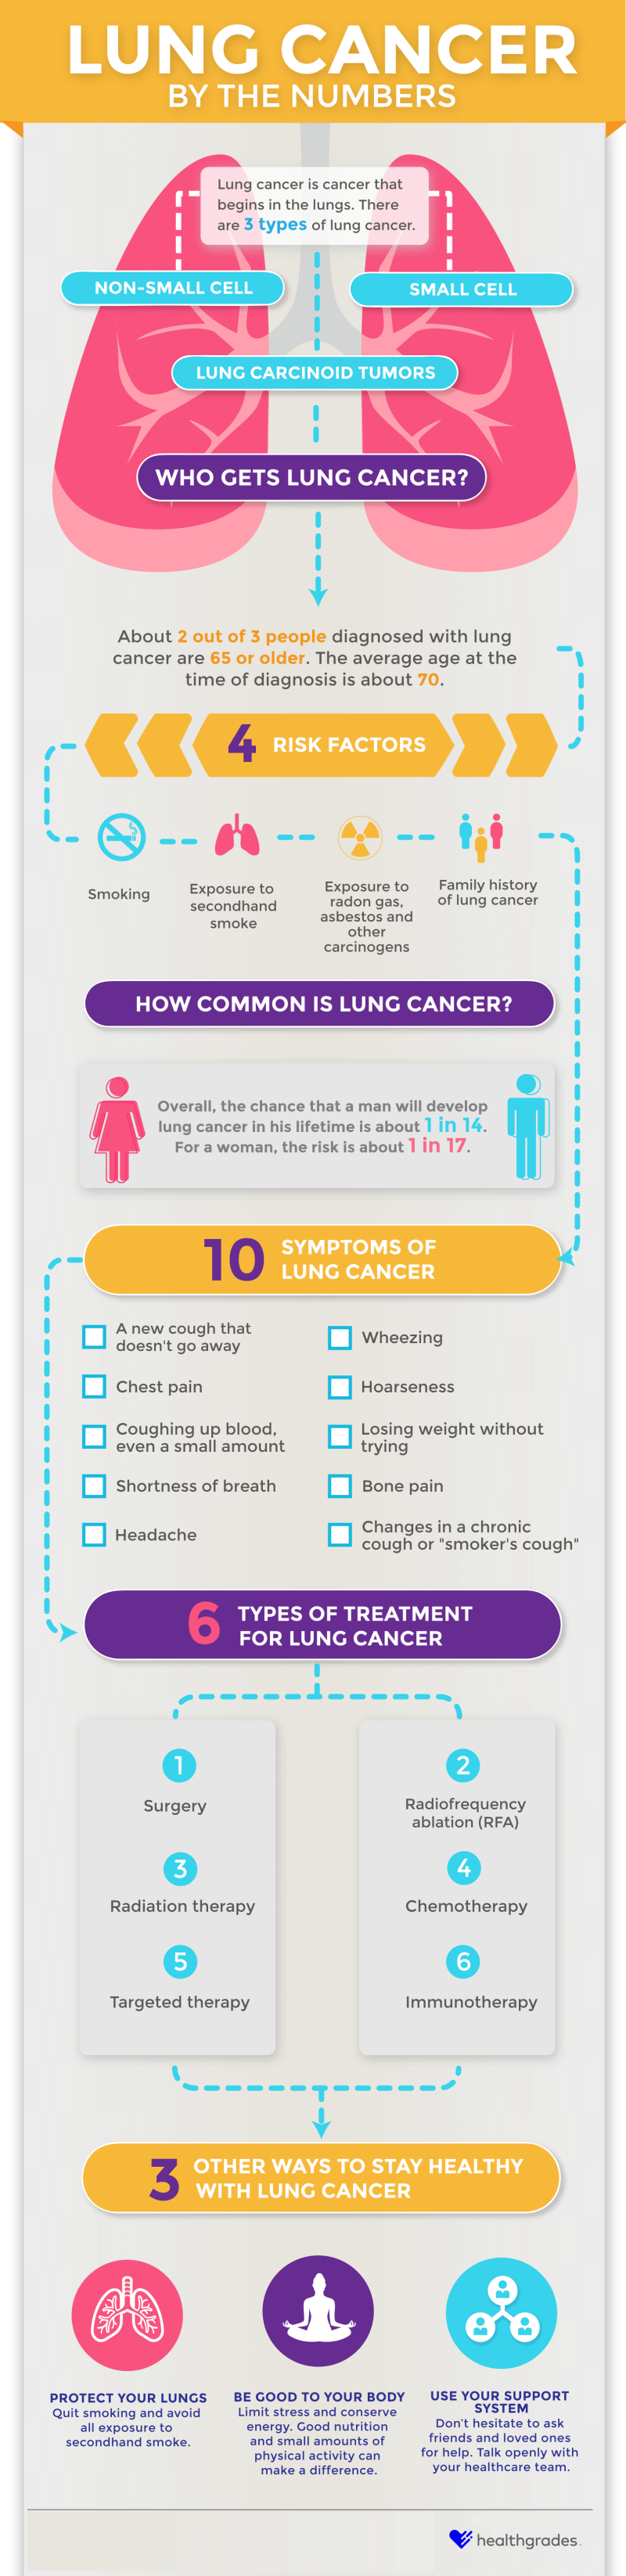 Lung Cancer By the Numbers